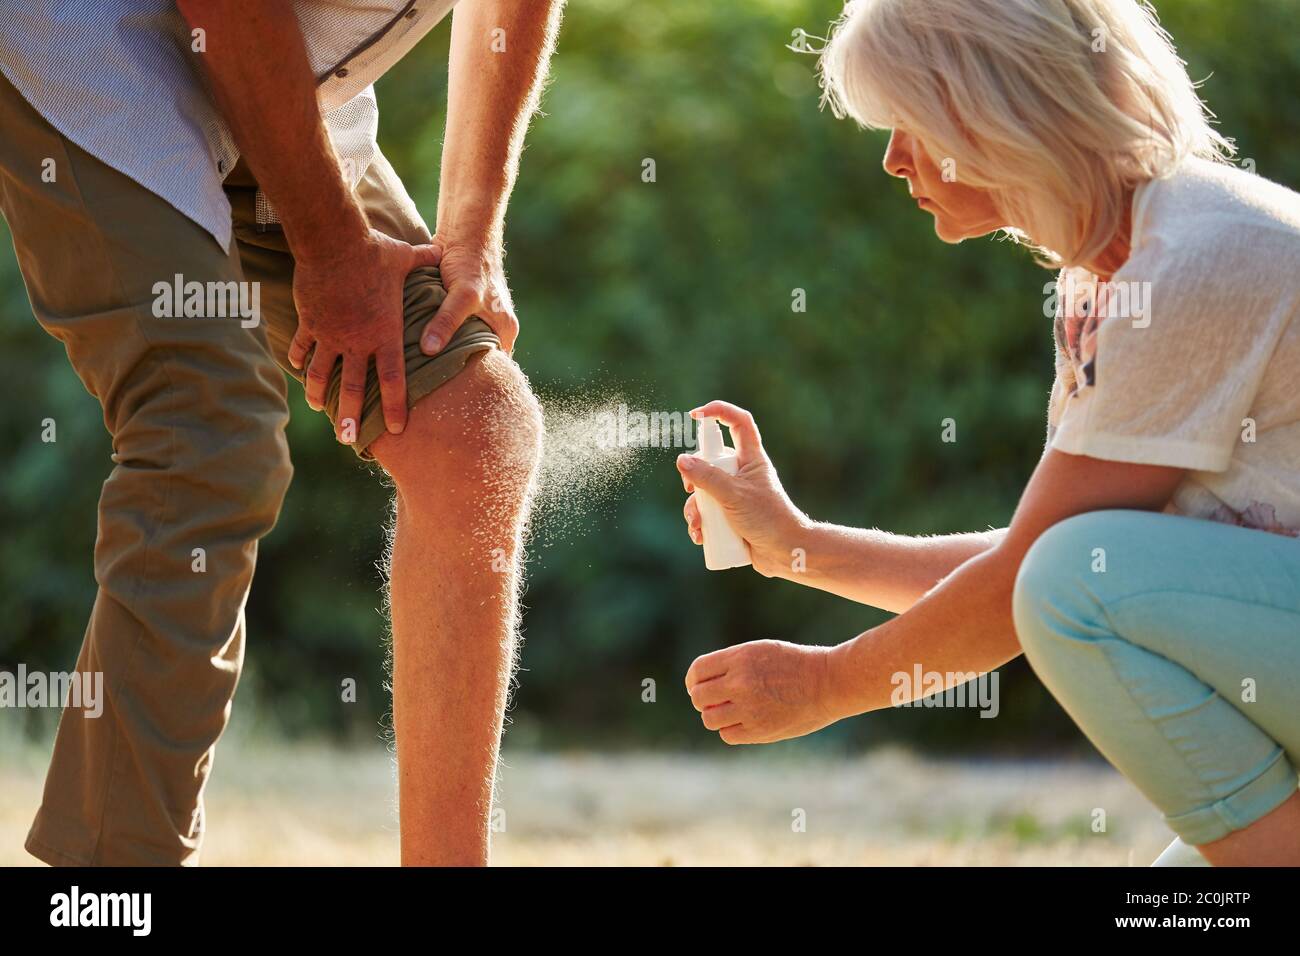 Man with knee injury in nature gets pain relief spray Stock Photo